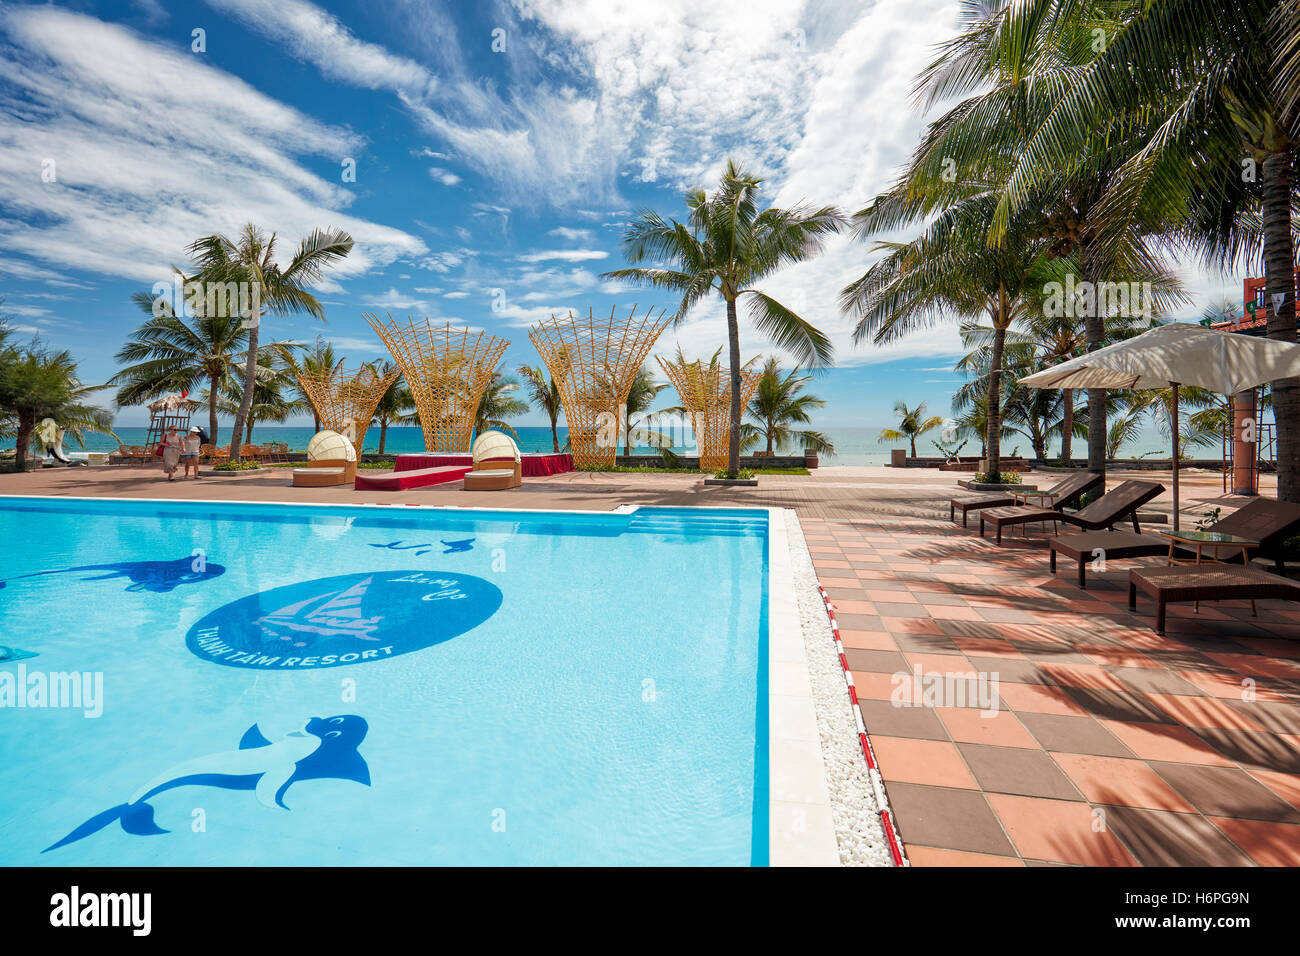 Swimming pool area at Thanh Tam Resort. Lang Co, Thua Thien Hue Province, Vietnam. Stock Photo